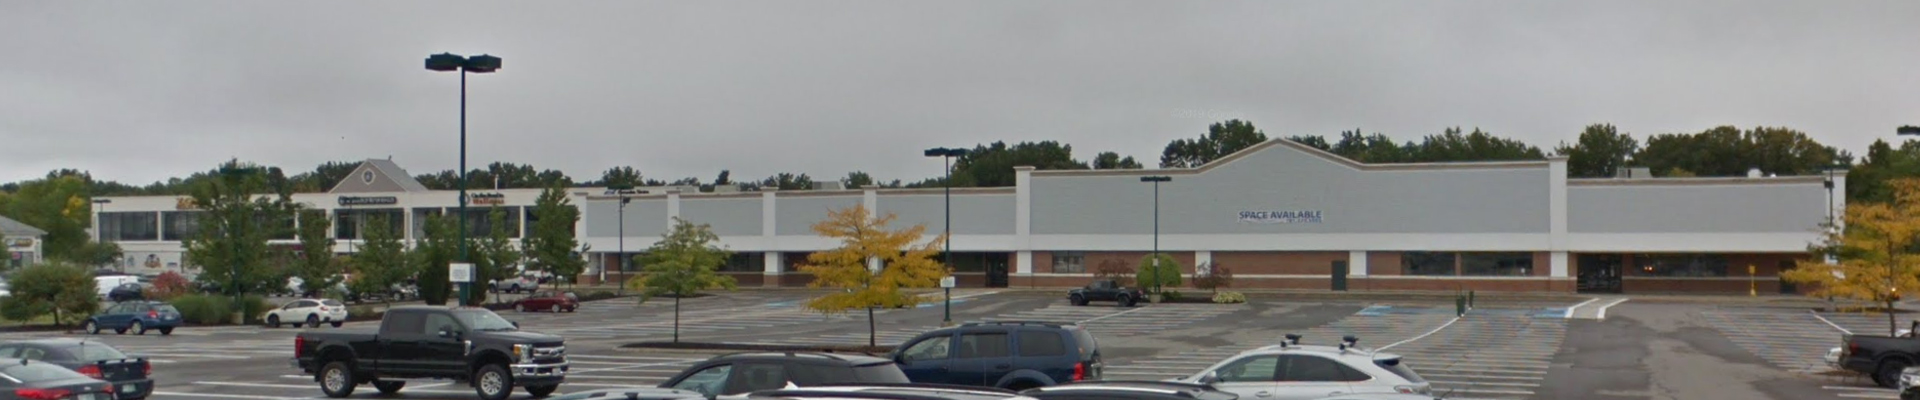 Shaw’s Supermarket – Manchester, New Hampshire